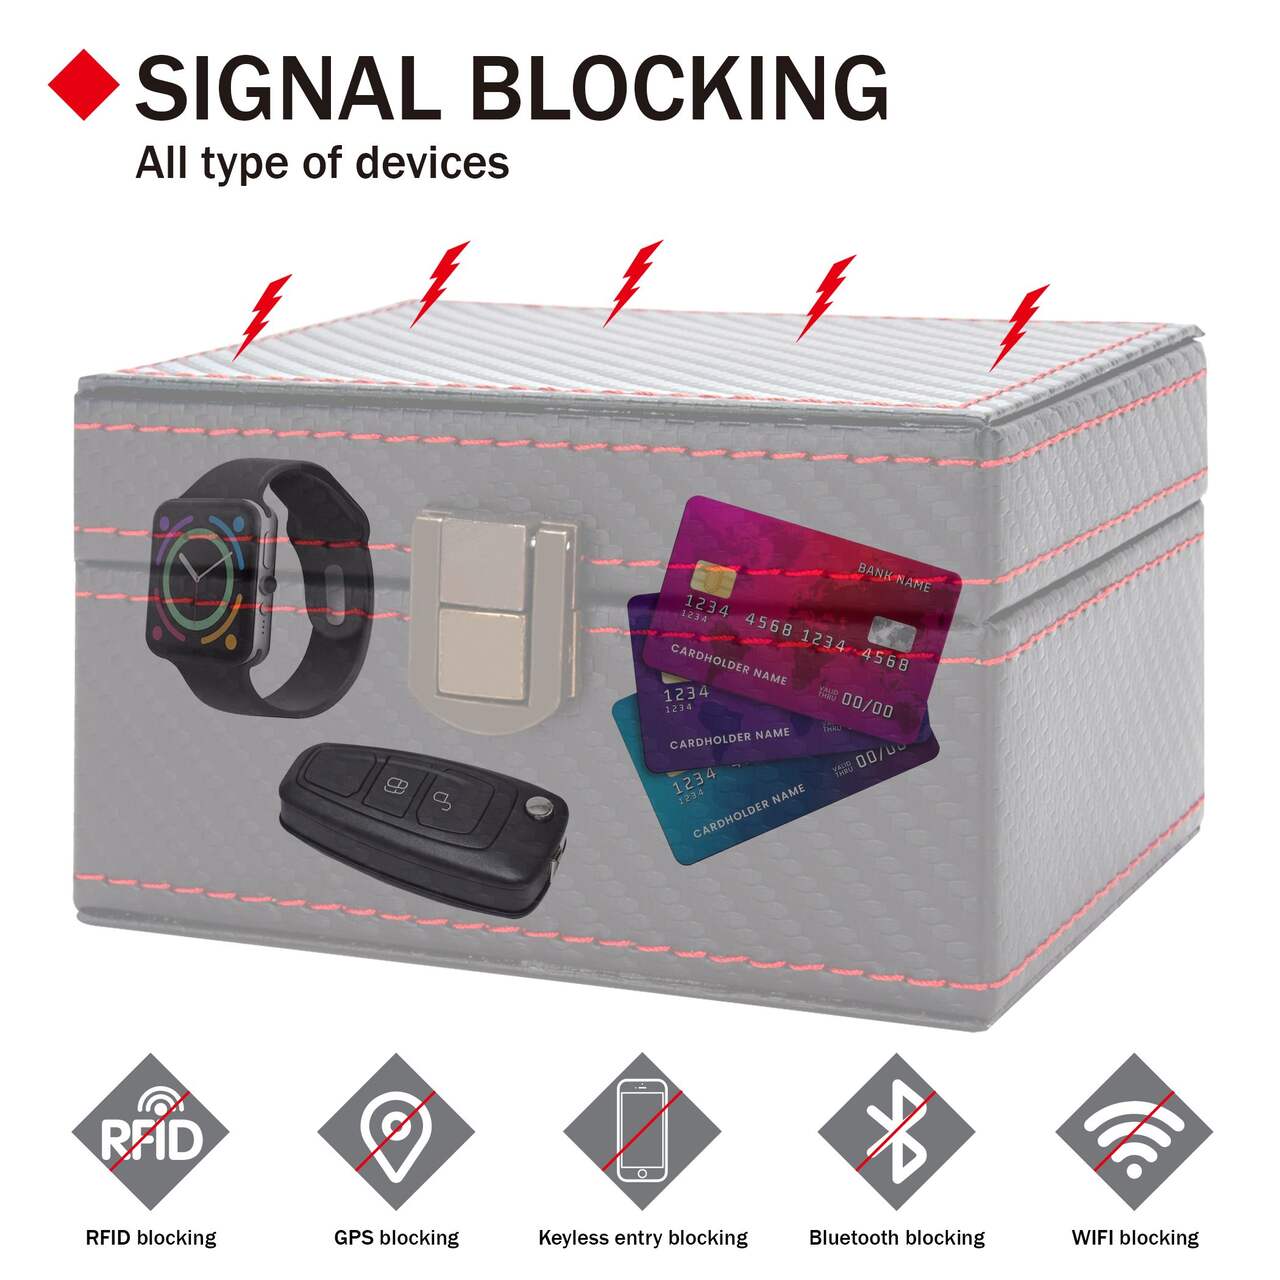 https://media-www.canadiantire.ca/product/automotive/car-care-accessories/auto-accessories/0379850/rfid-signal-blocking-box-small-dadeb10f-68e1-4b70-9e10-162467d393a9-jpgrendition.jpg?imdensity=1&imwidth=1244&impolicy=mZoom